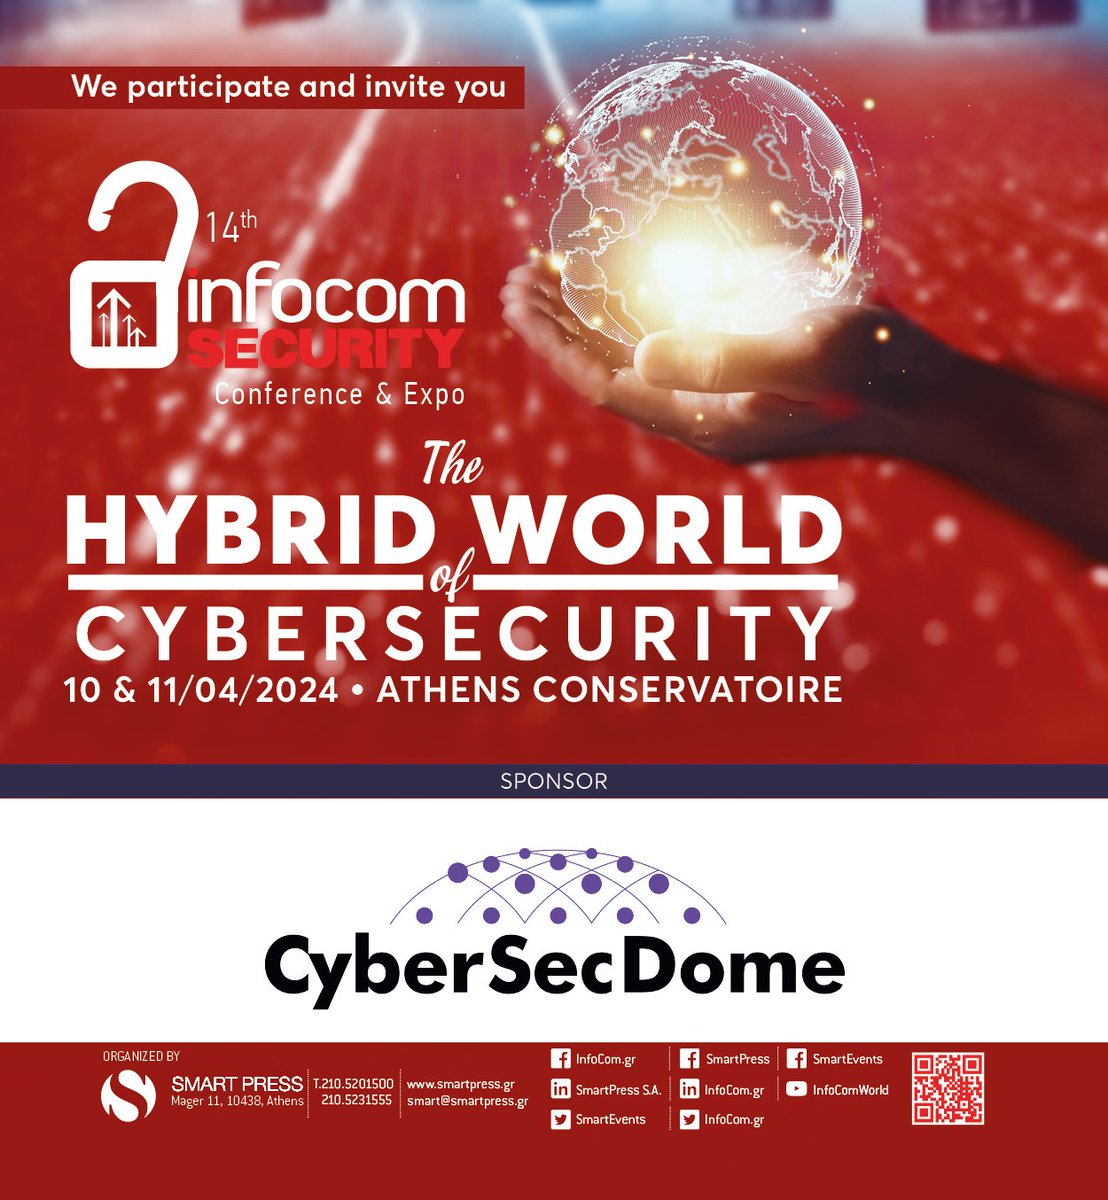 Excited to announce that #CyberSecDome will be at the '14th InfoCom Security 2024' event on April 10 & 11 at the Athens Conservatory! 
Explore #AI, #IoT, and Hybrid #CloudTechnologies with us as we dive into the latest in #Cybersecurity
Register: infocomsecurity.gr/14o-infocom-se…